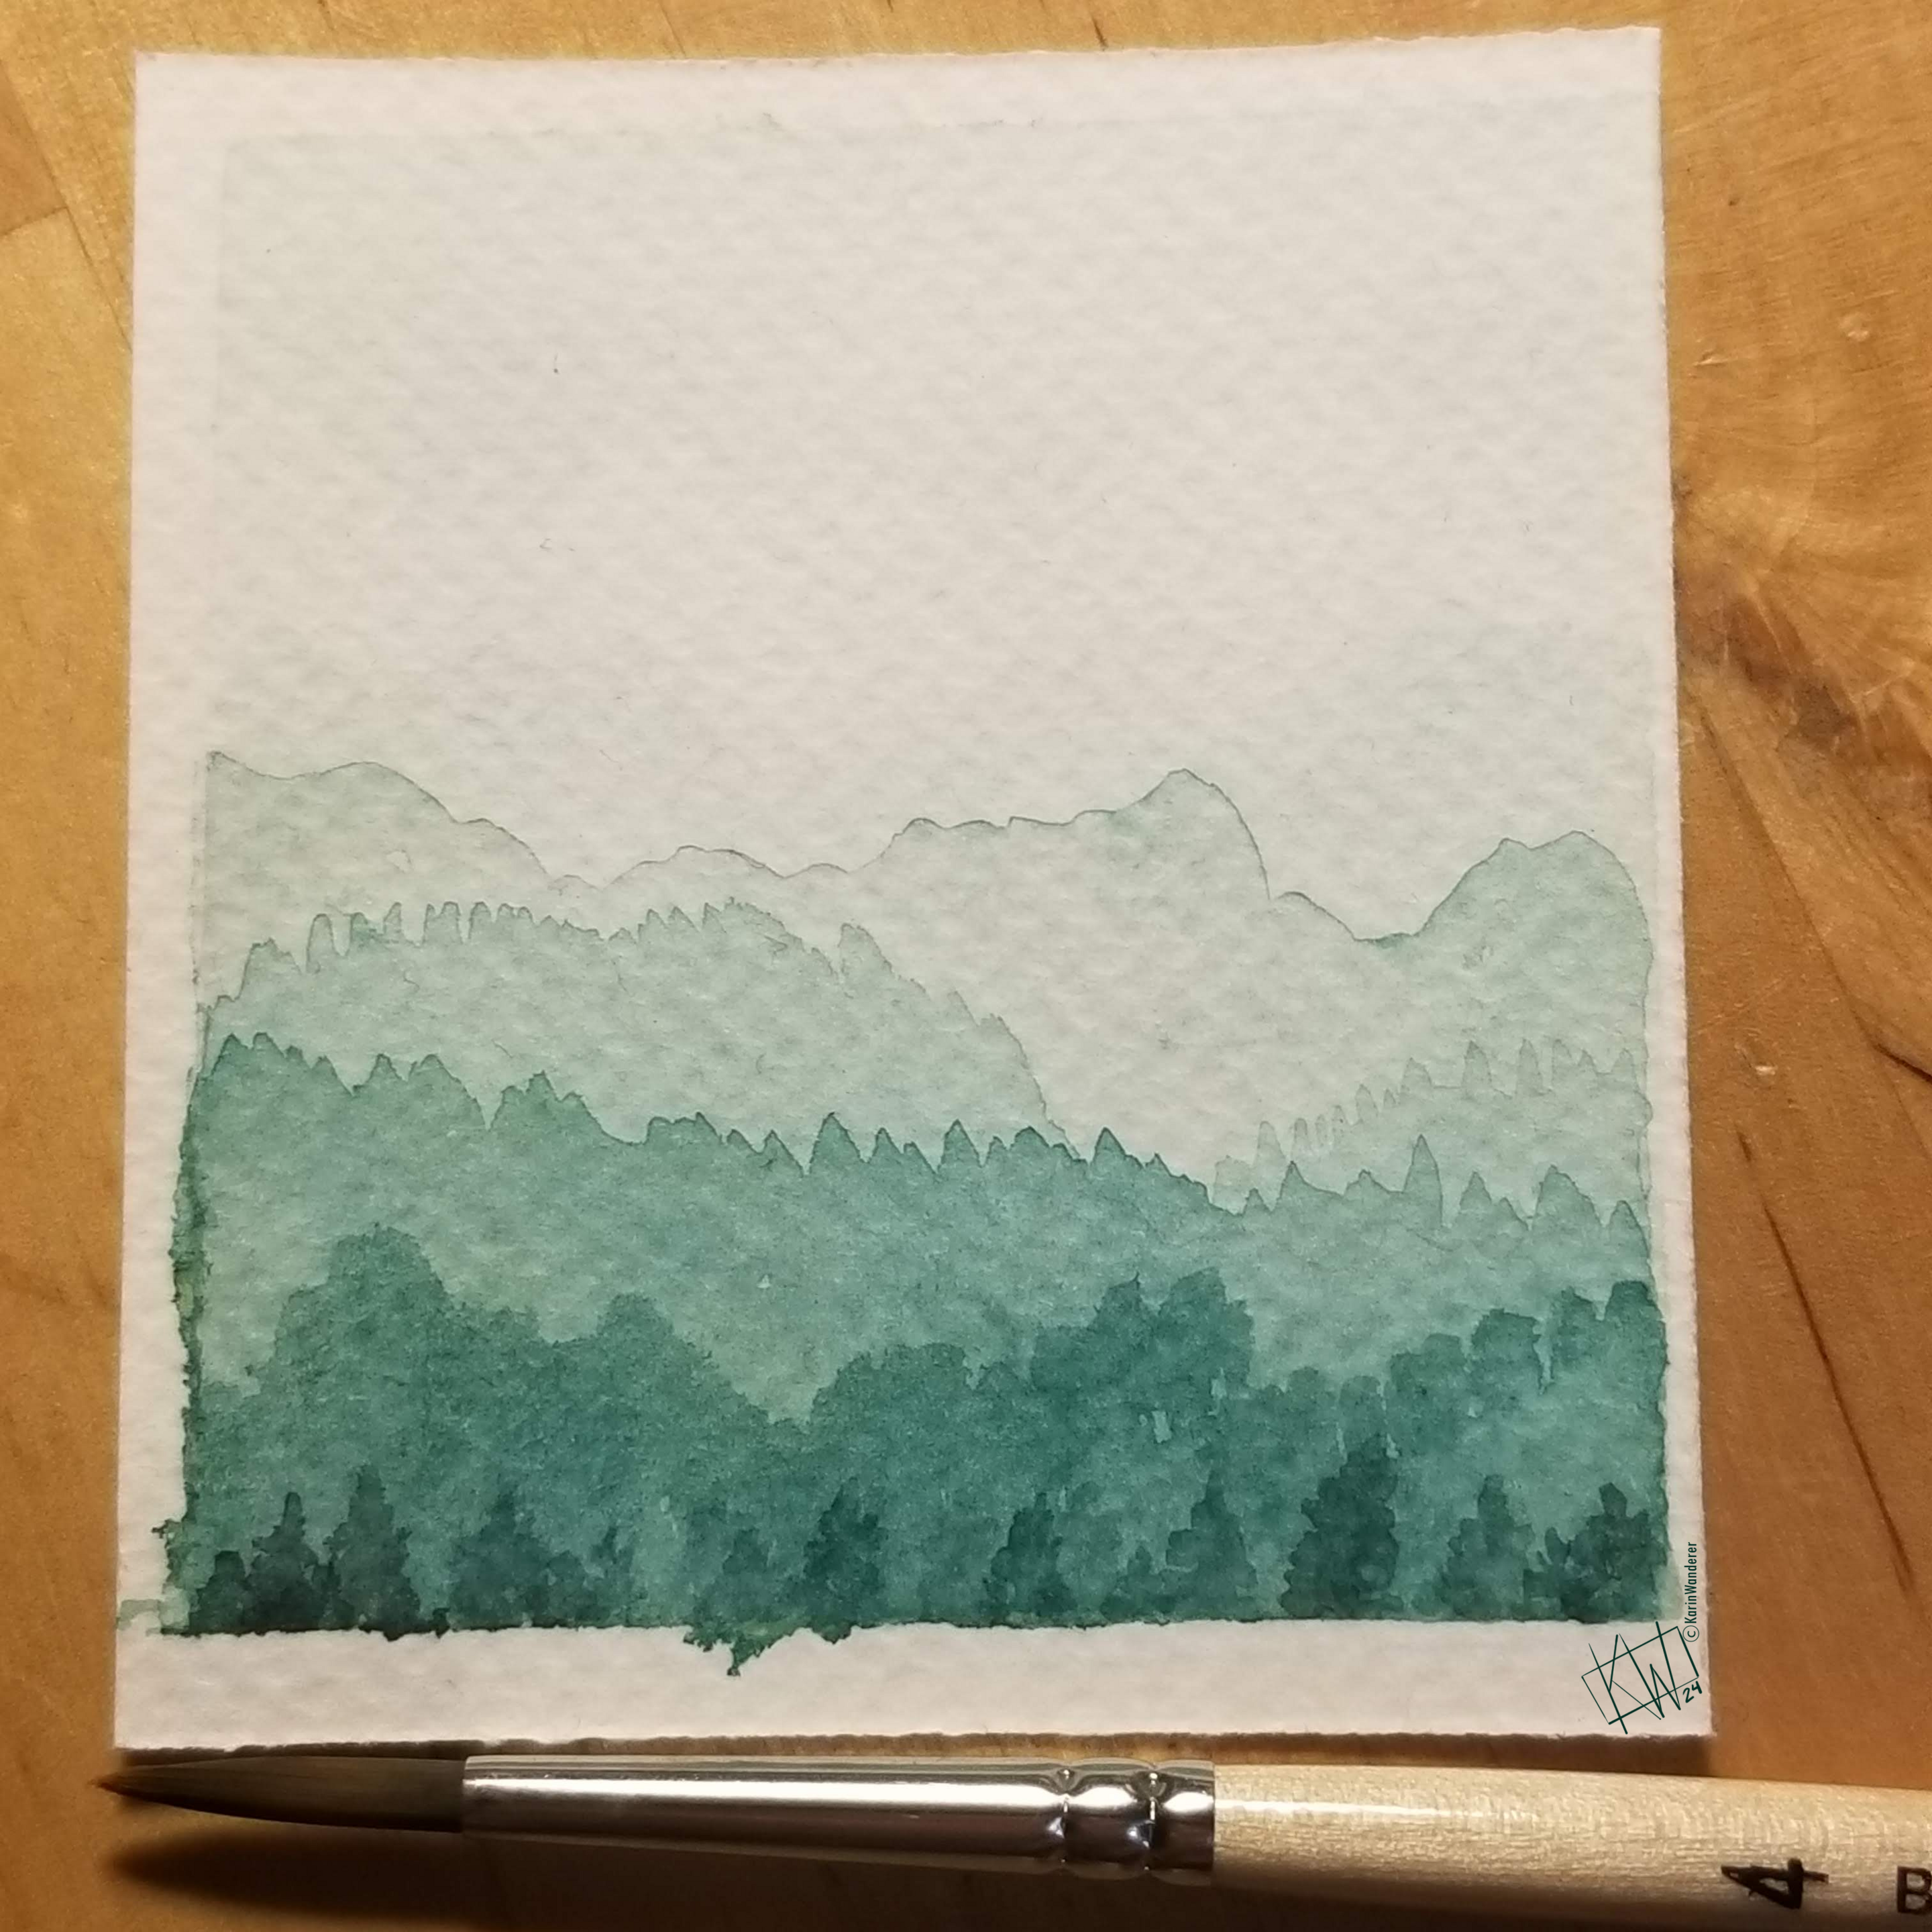 Watercolor landscape in shades of green: pine trees stand in front of forested mountains stretching back into the foggy distance.